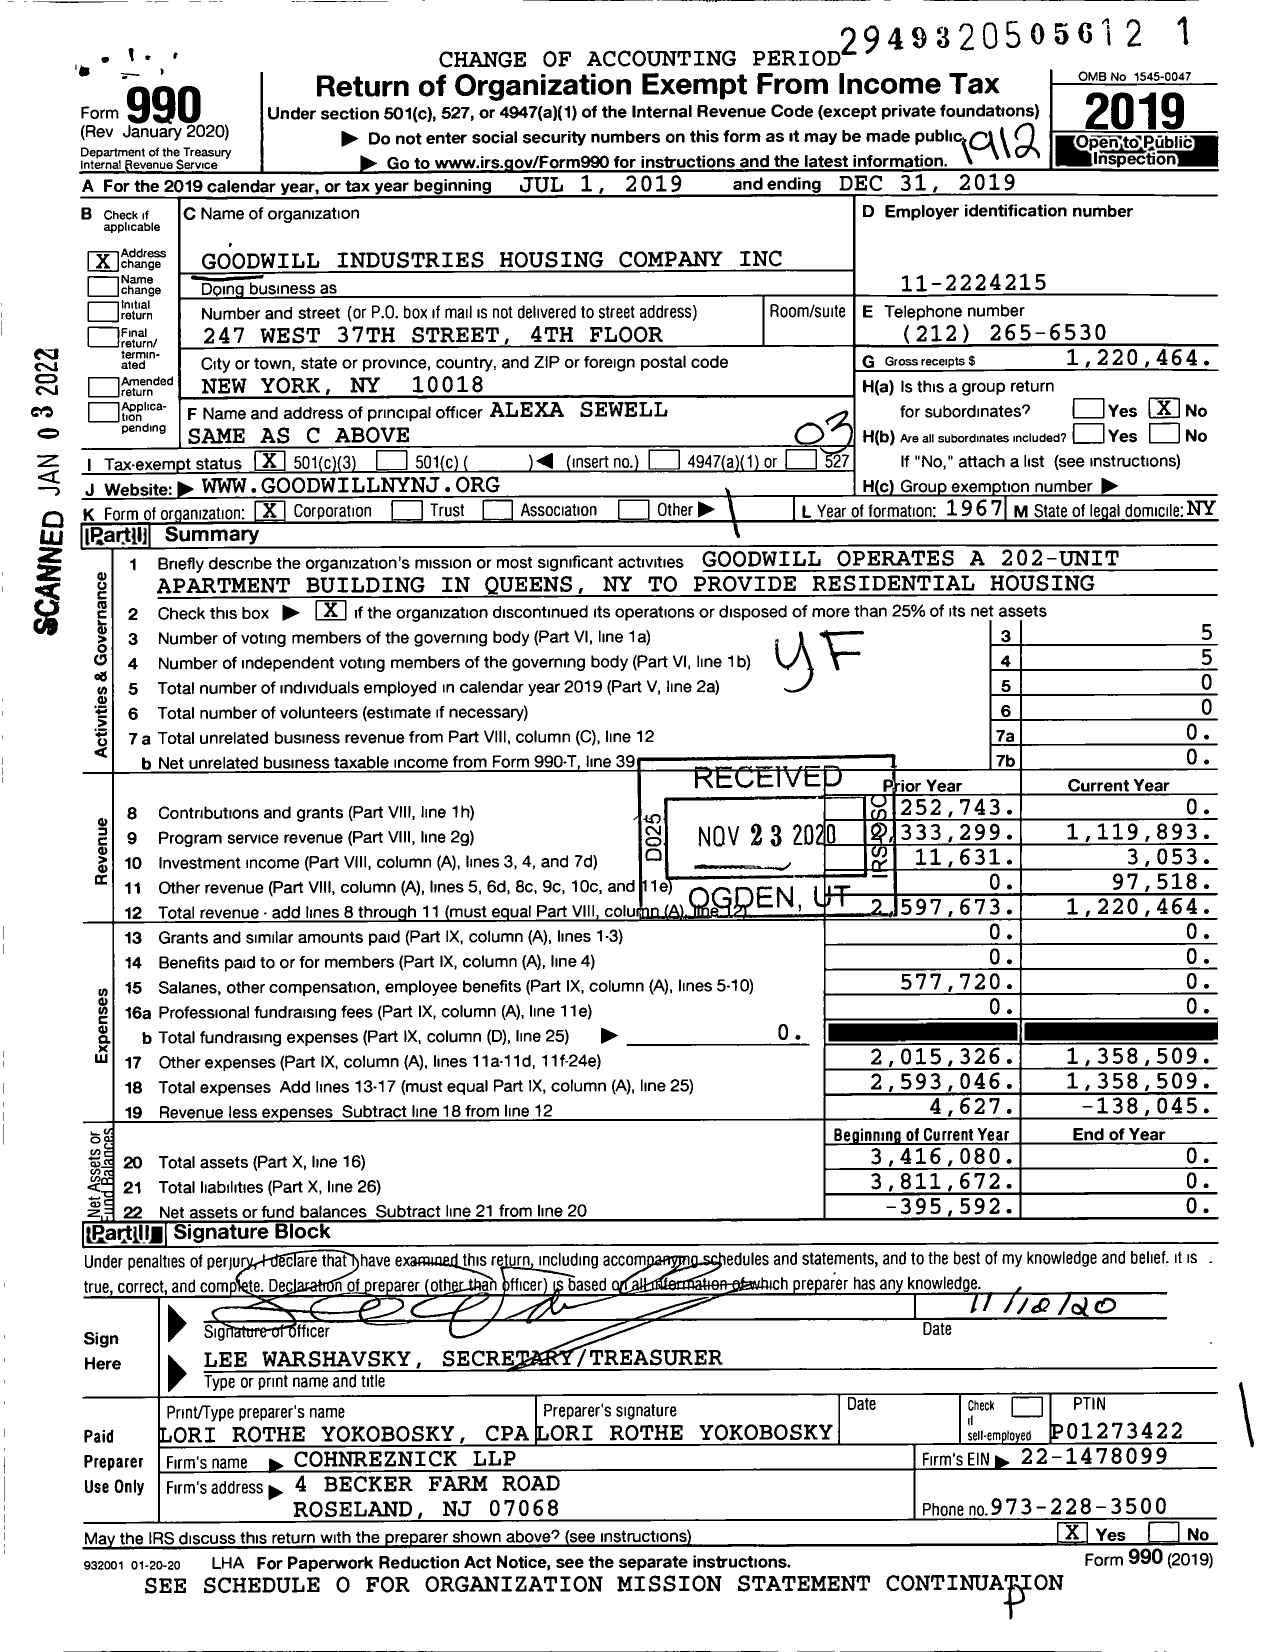 Image of first page of 2019 Form 990 for Goodwill Industries Housing Company